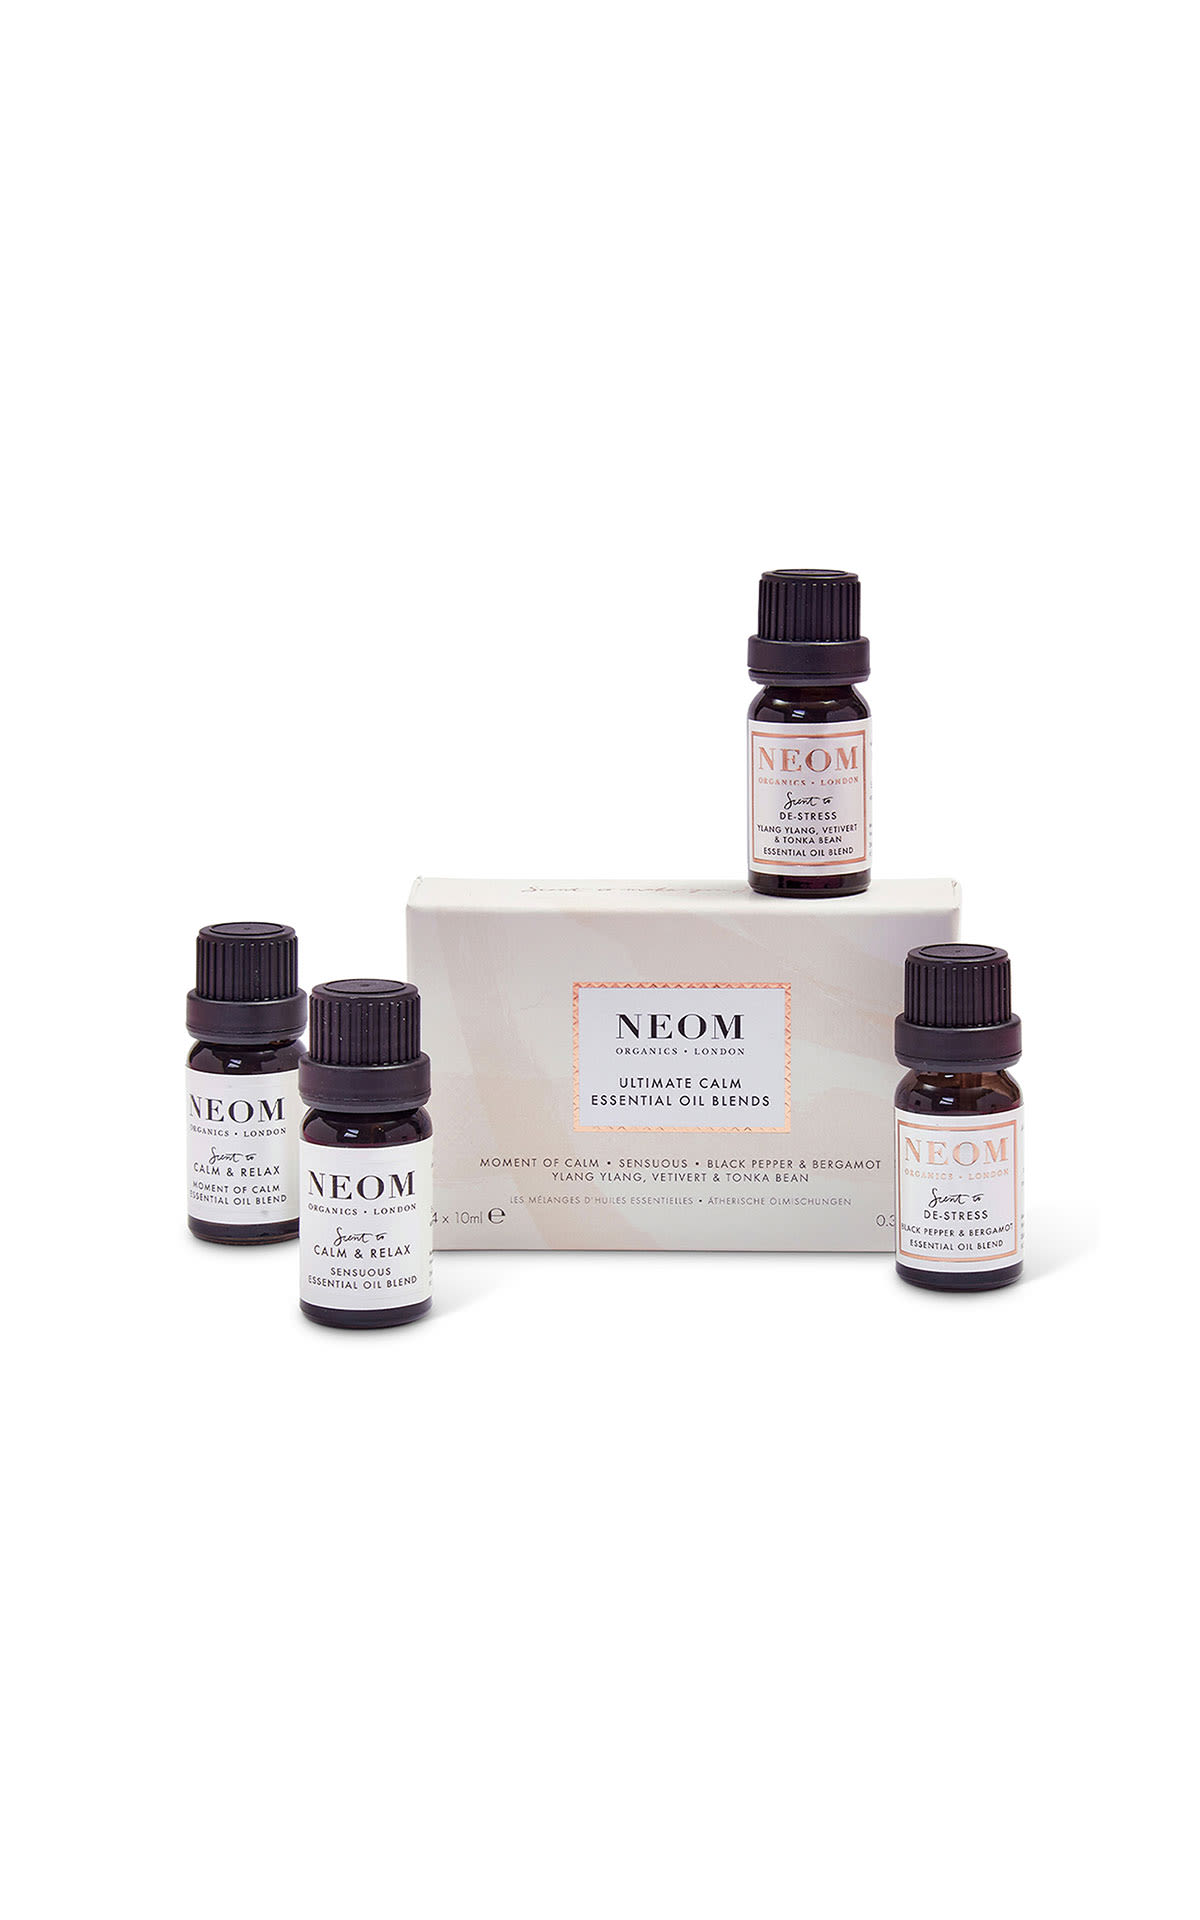 NEOM Ultimate calm essential oil blends collection from Bicester Village